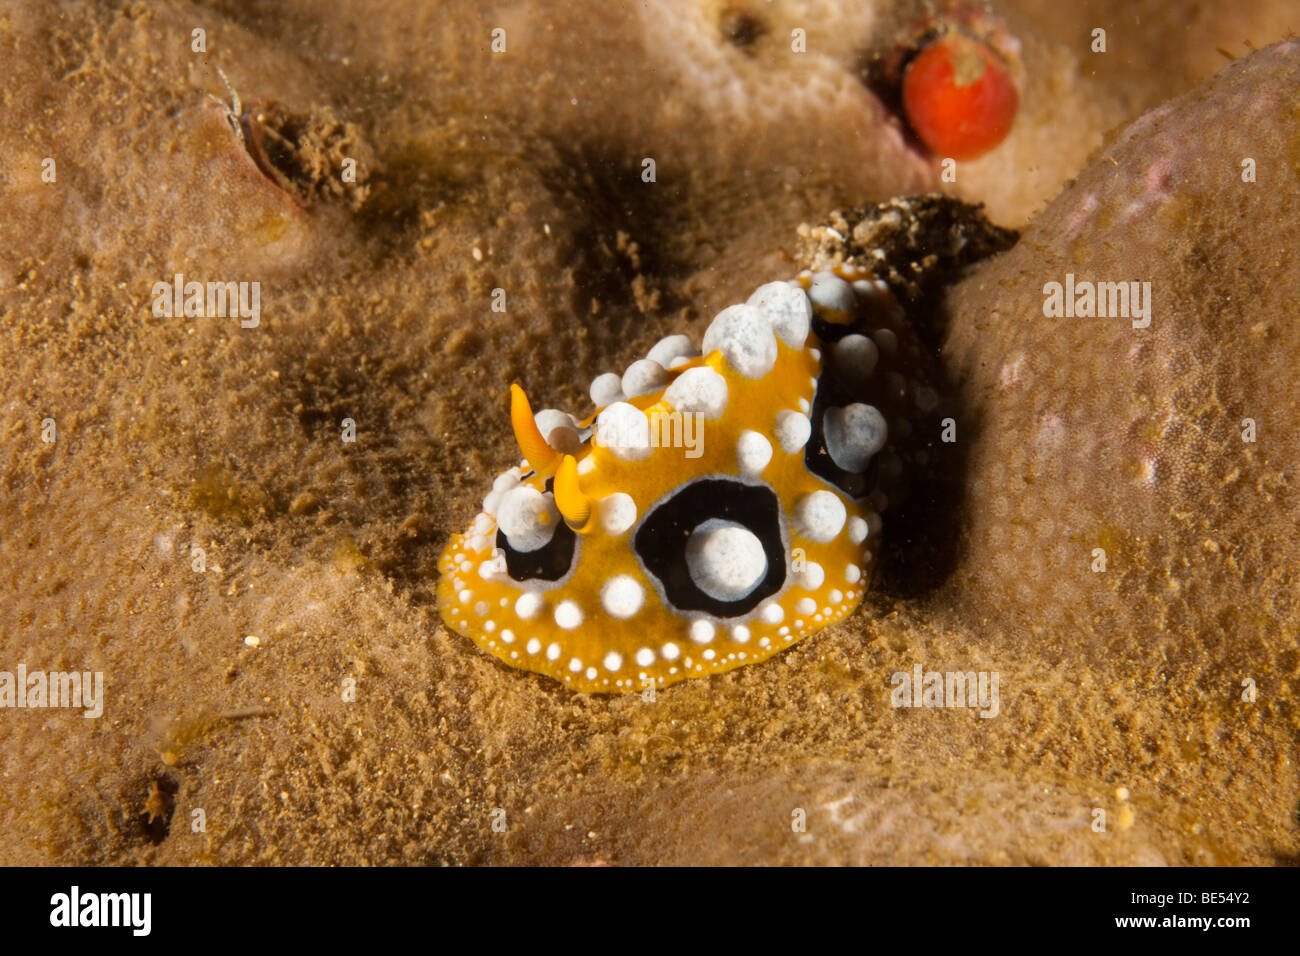 Ocellate nudibranch (Phyllidia ocellata), Indonesia, Southeast Asia Stock Photo